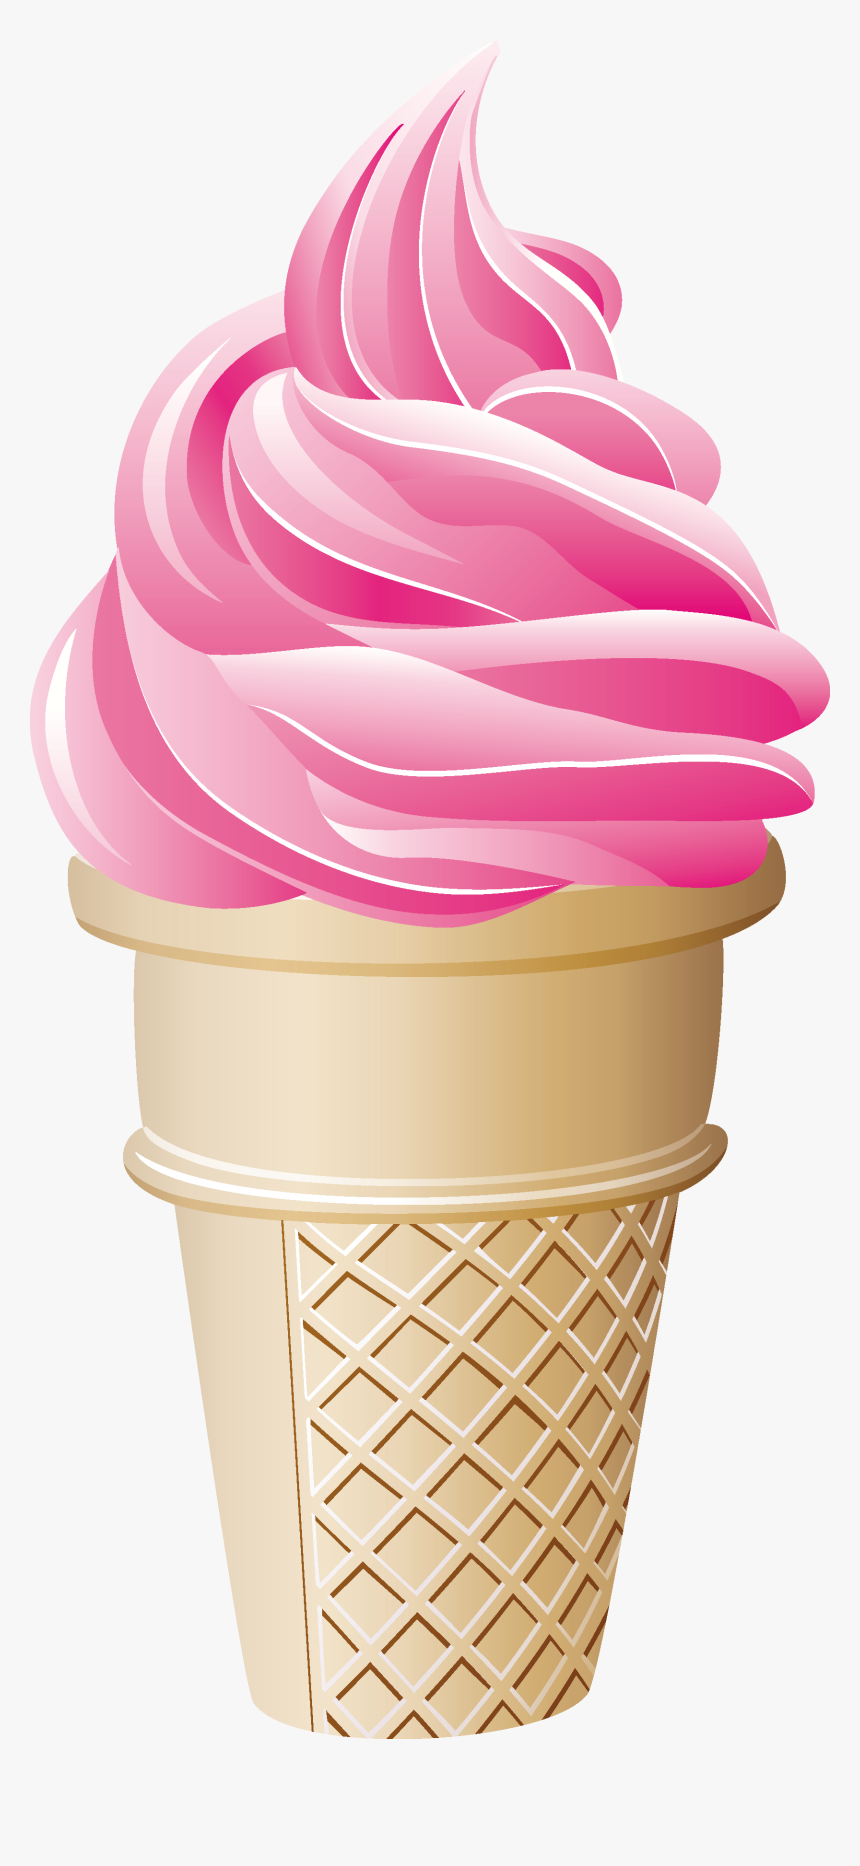 Ice Cream Png Image - Ice Cream Clip Art Png, Transparent Png, Free Download